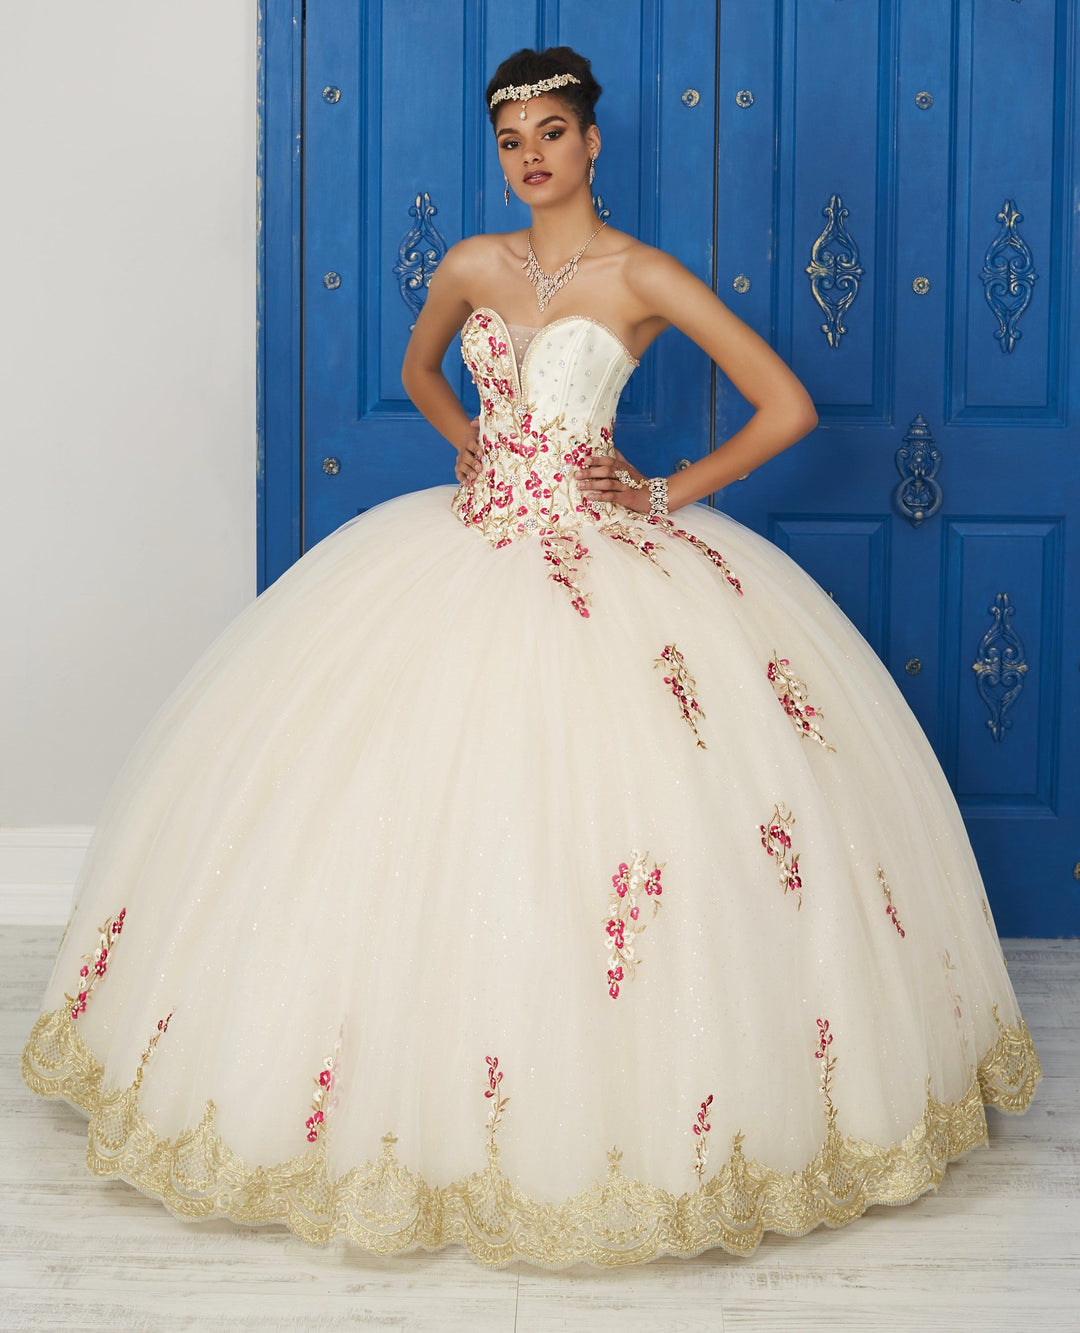 Floral Embroidered V-Neck Dress by House of Wu LA Glitter 24032-Quinceanera Dresses-ABC Fashion